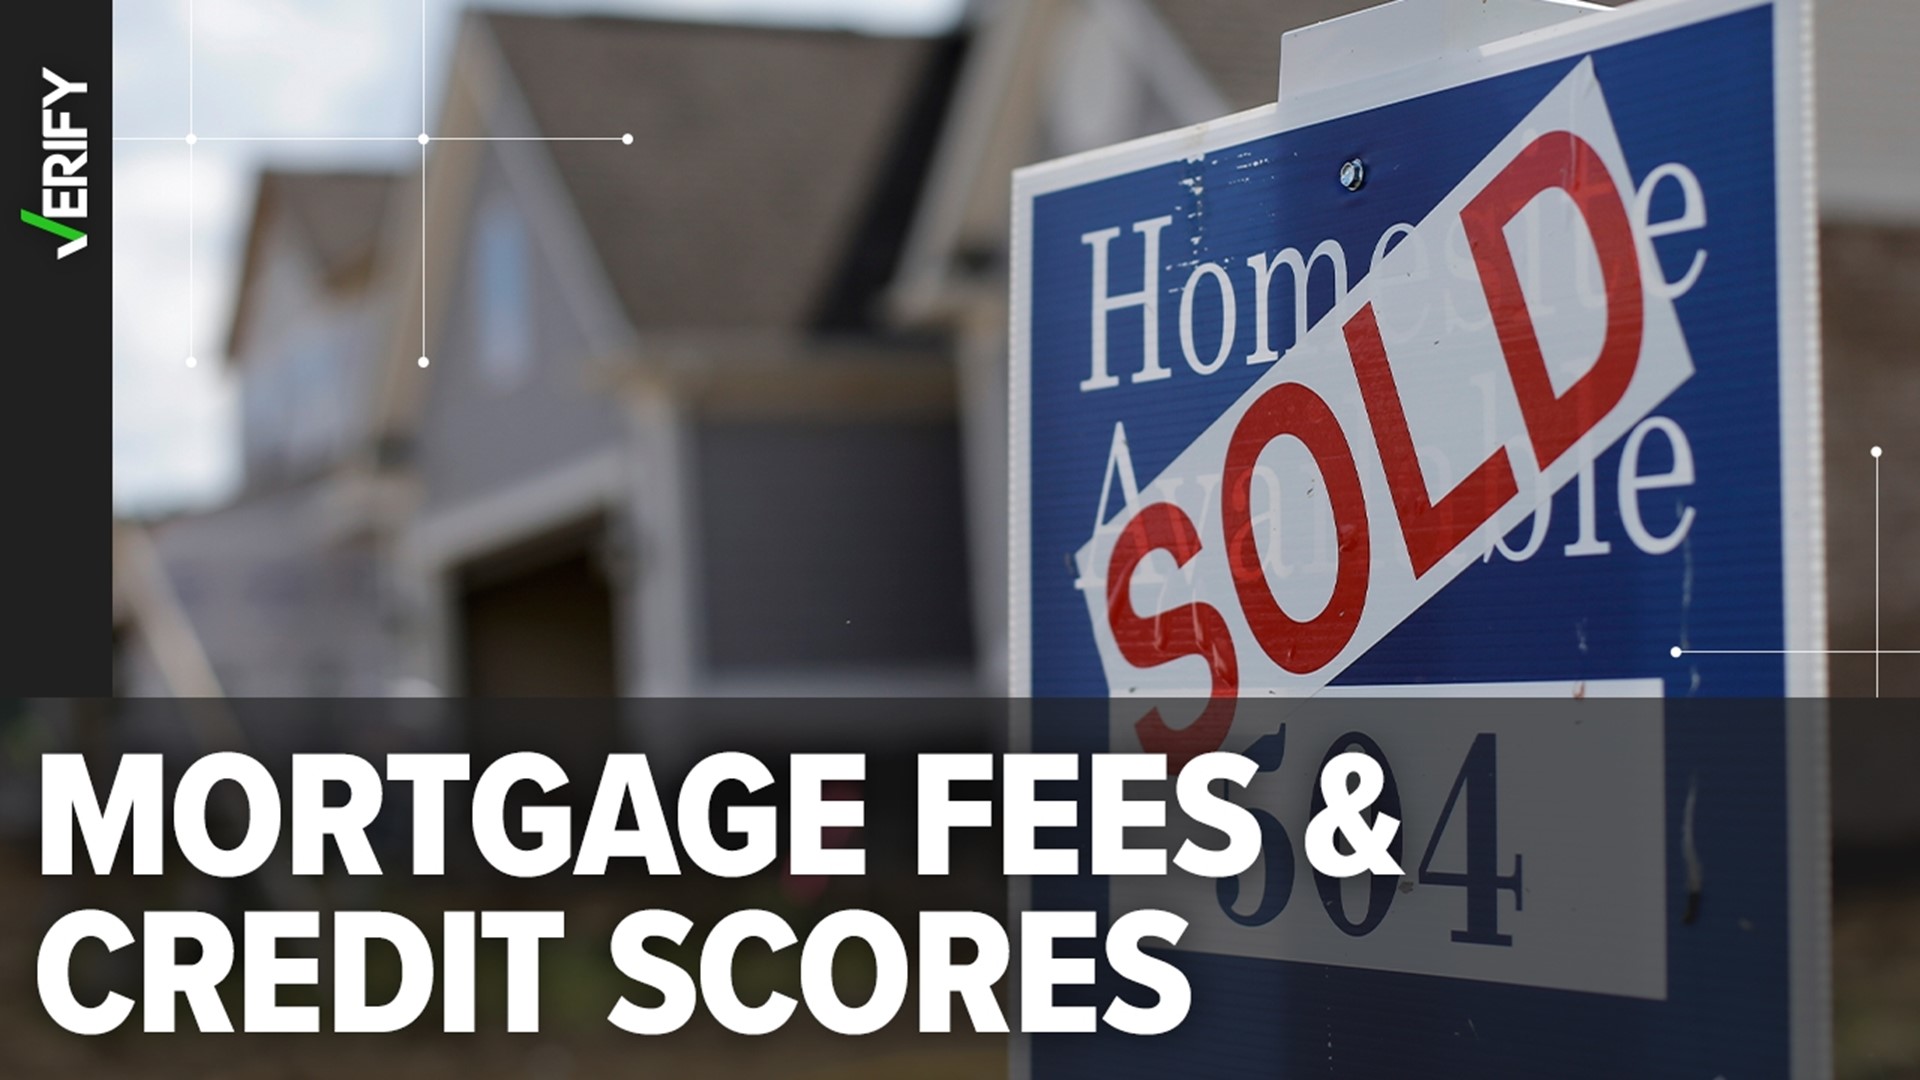 People online have claimed that a new mortgage fee structure will penalize people with good credit. Here’s what we can VERIFY.